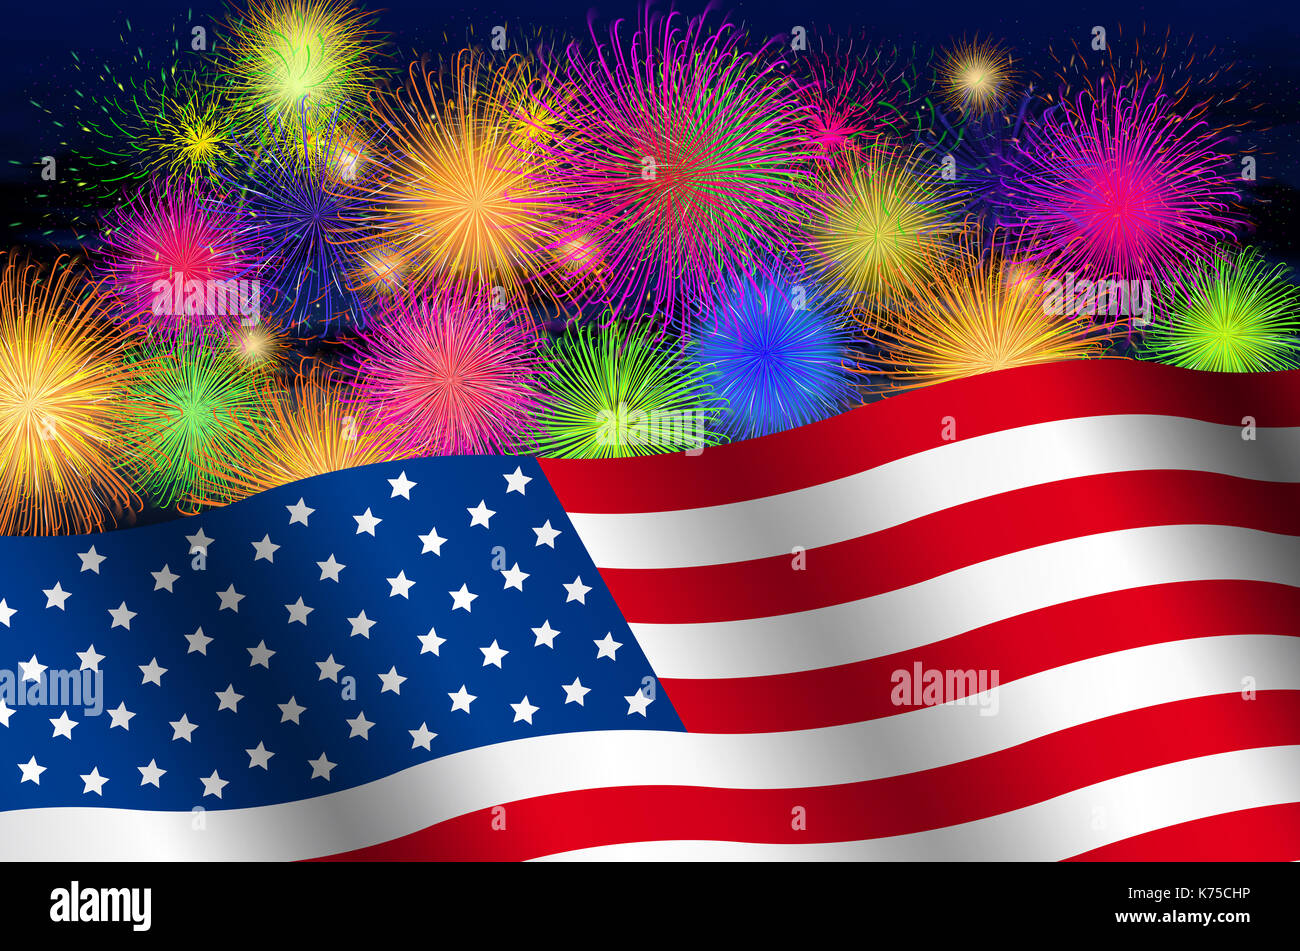 Digital illustration of the flag of United States of America on a background of a night sky with fireworks Stock Photo